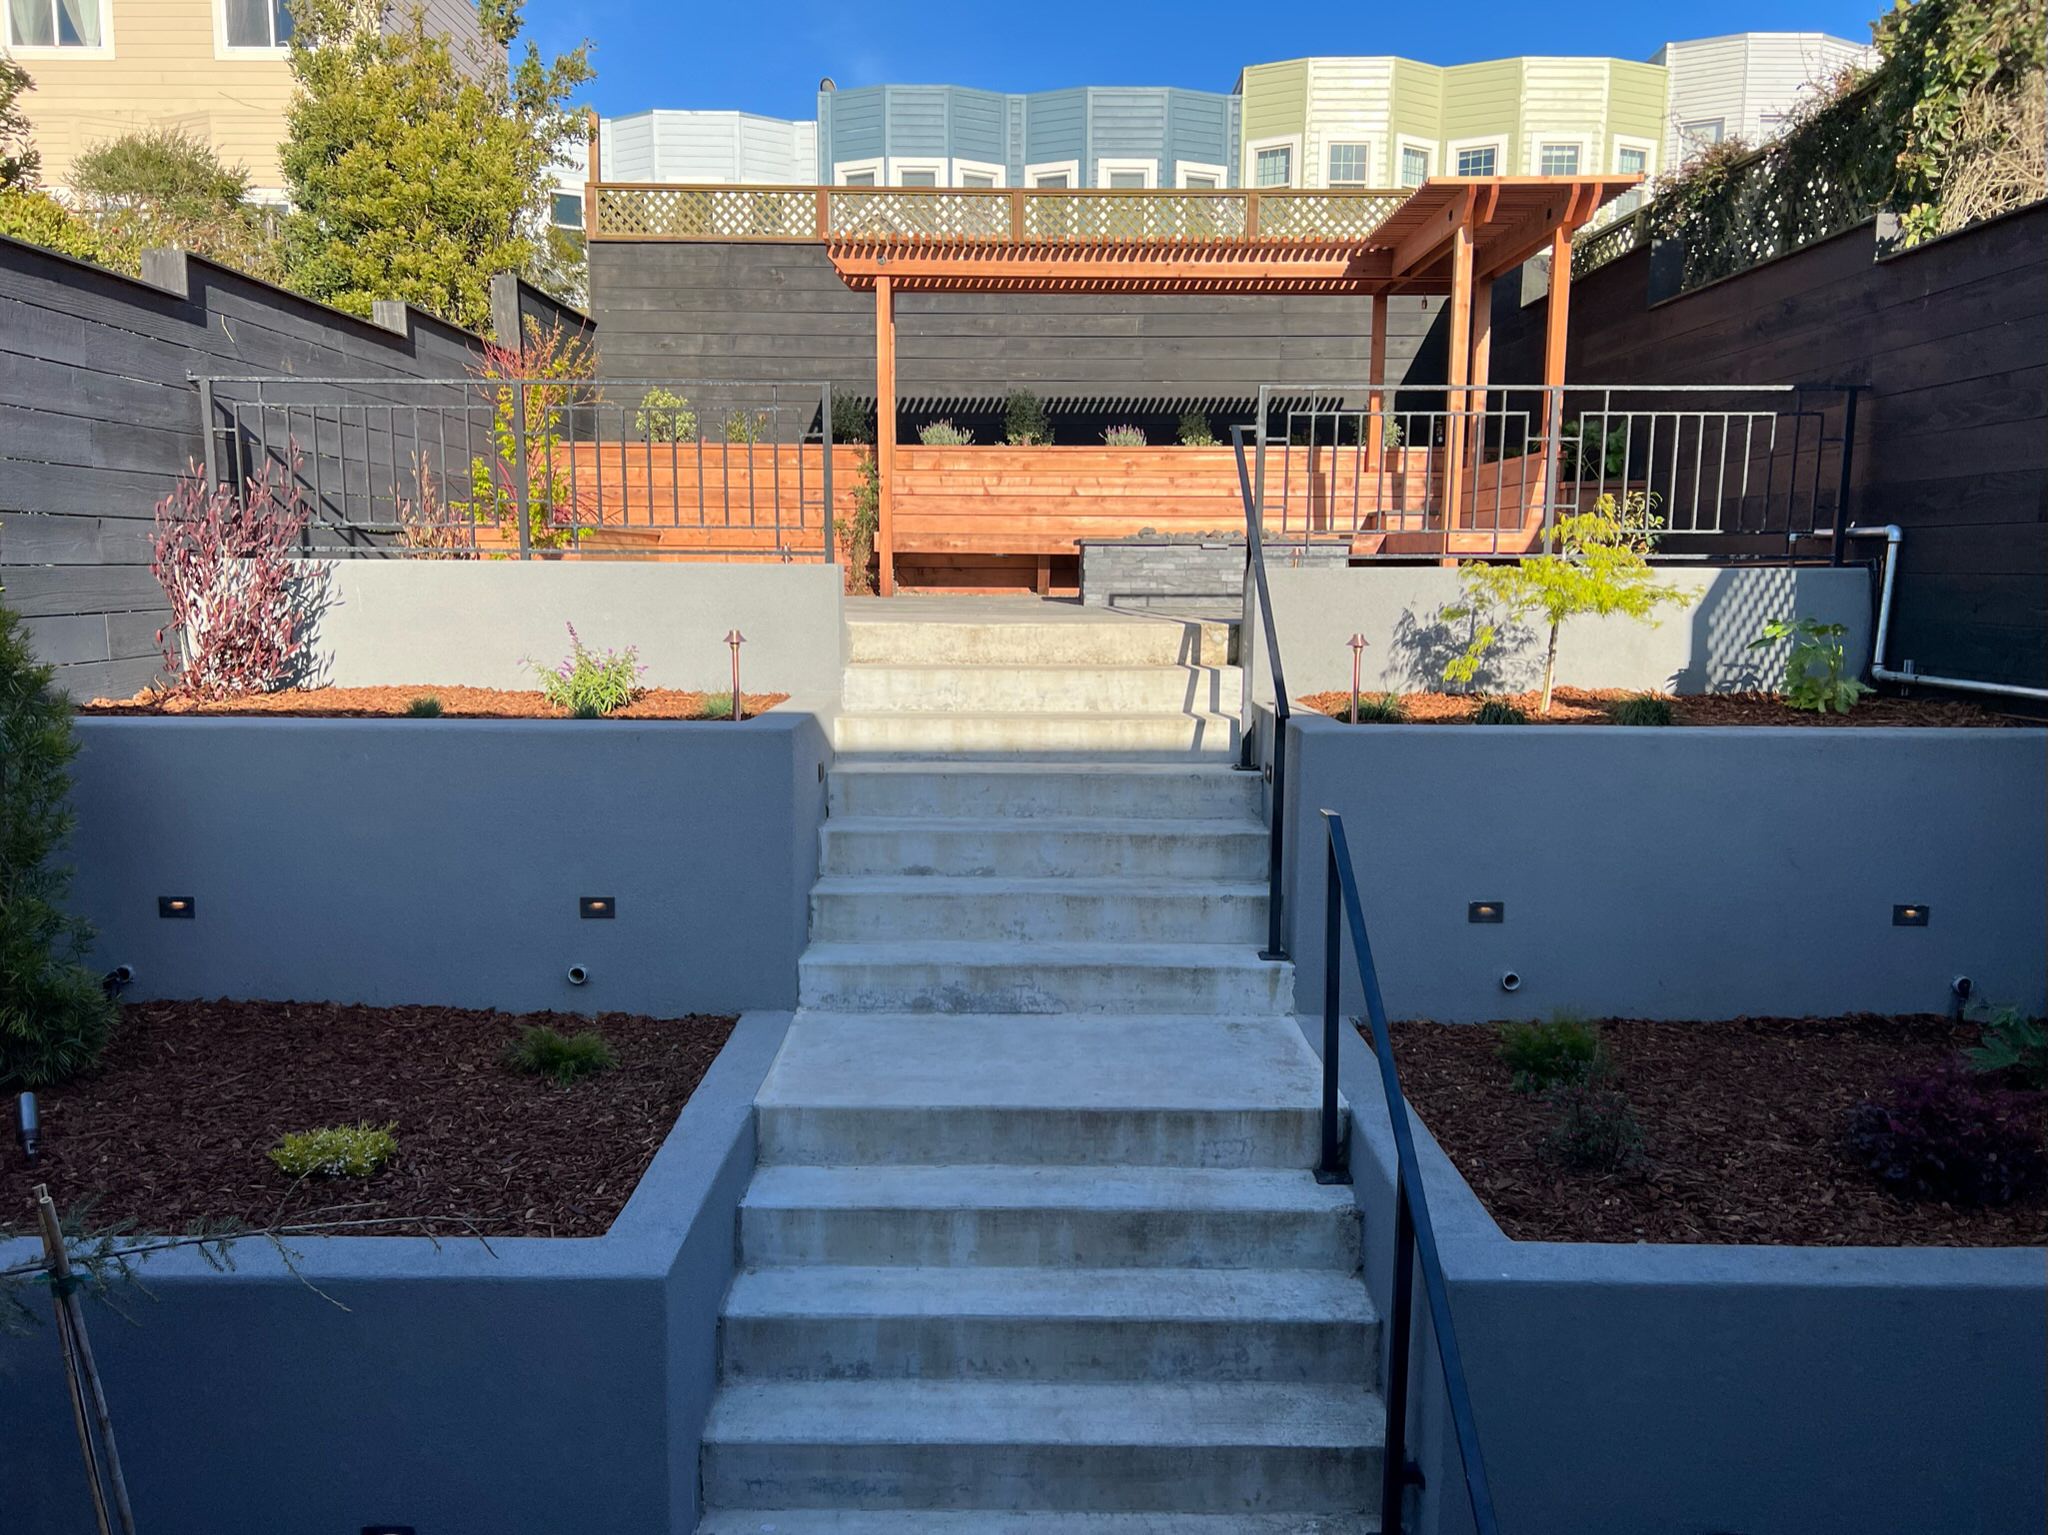 Completed backyard at our Outer Sunset, San Francisco project. Two tiered retaining walls on right and left side of stairway leading up to top level patio area. Two tiered retaining walls with plants. Top tier patio area with redwood bench and pergola above.